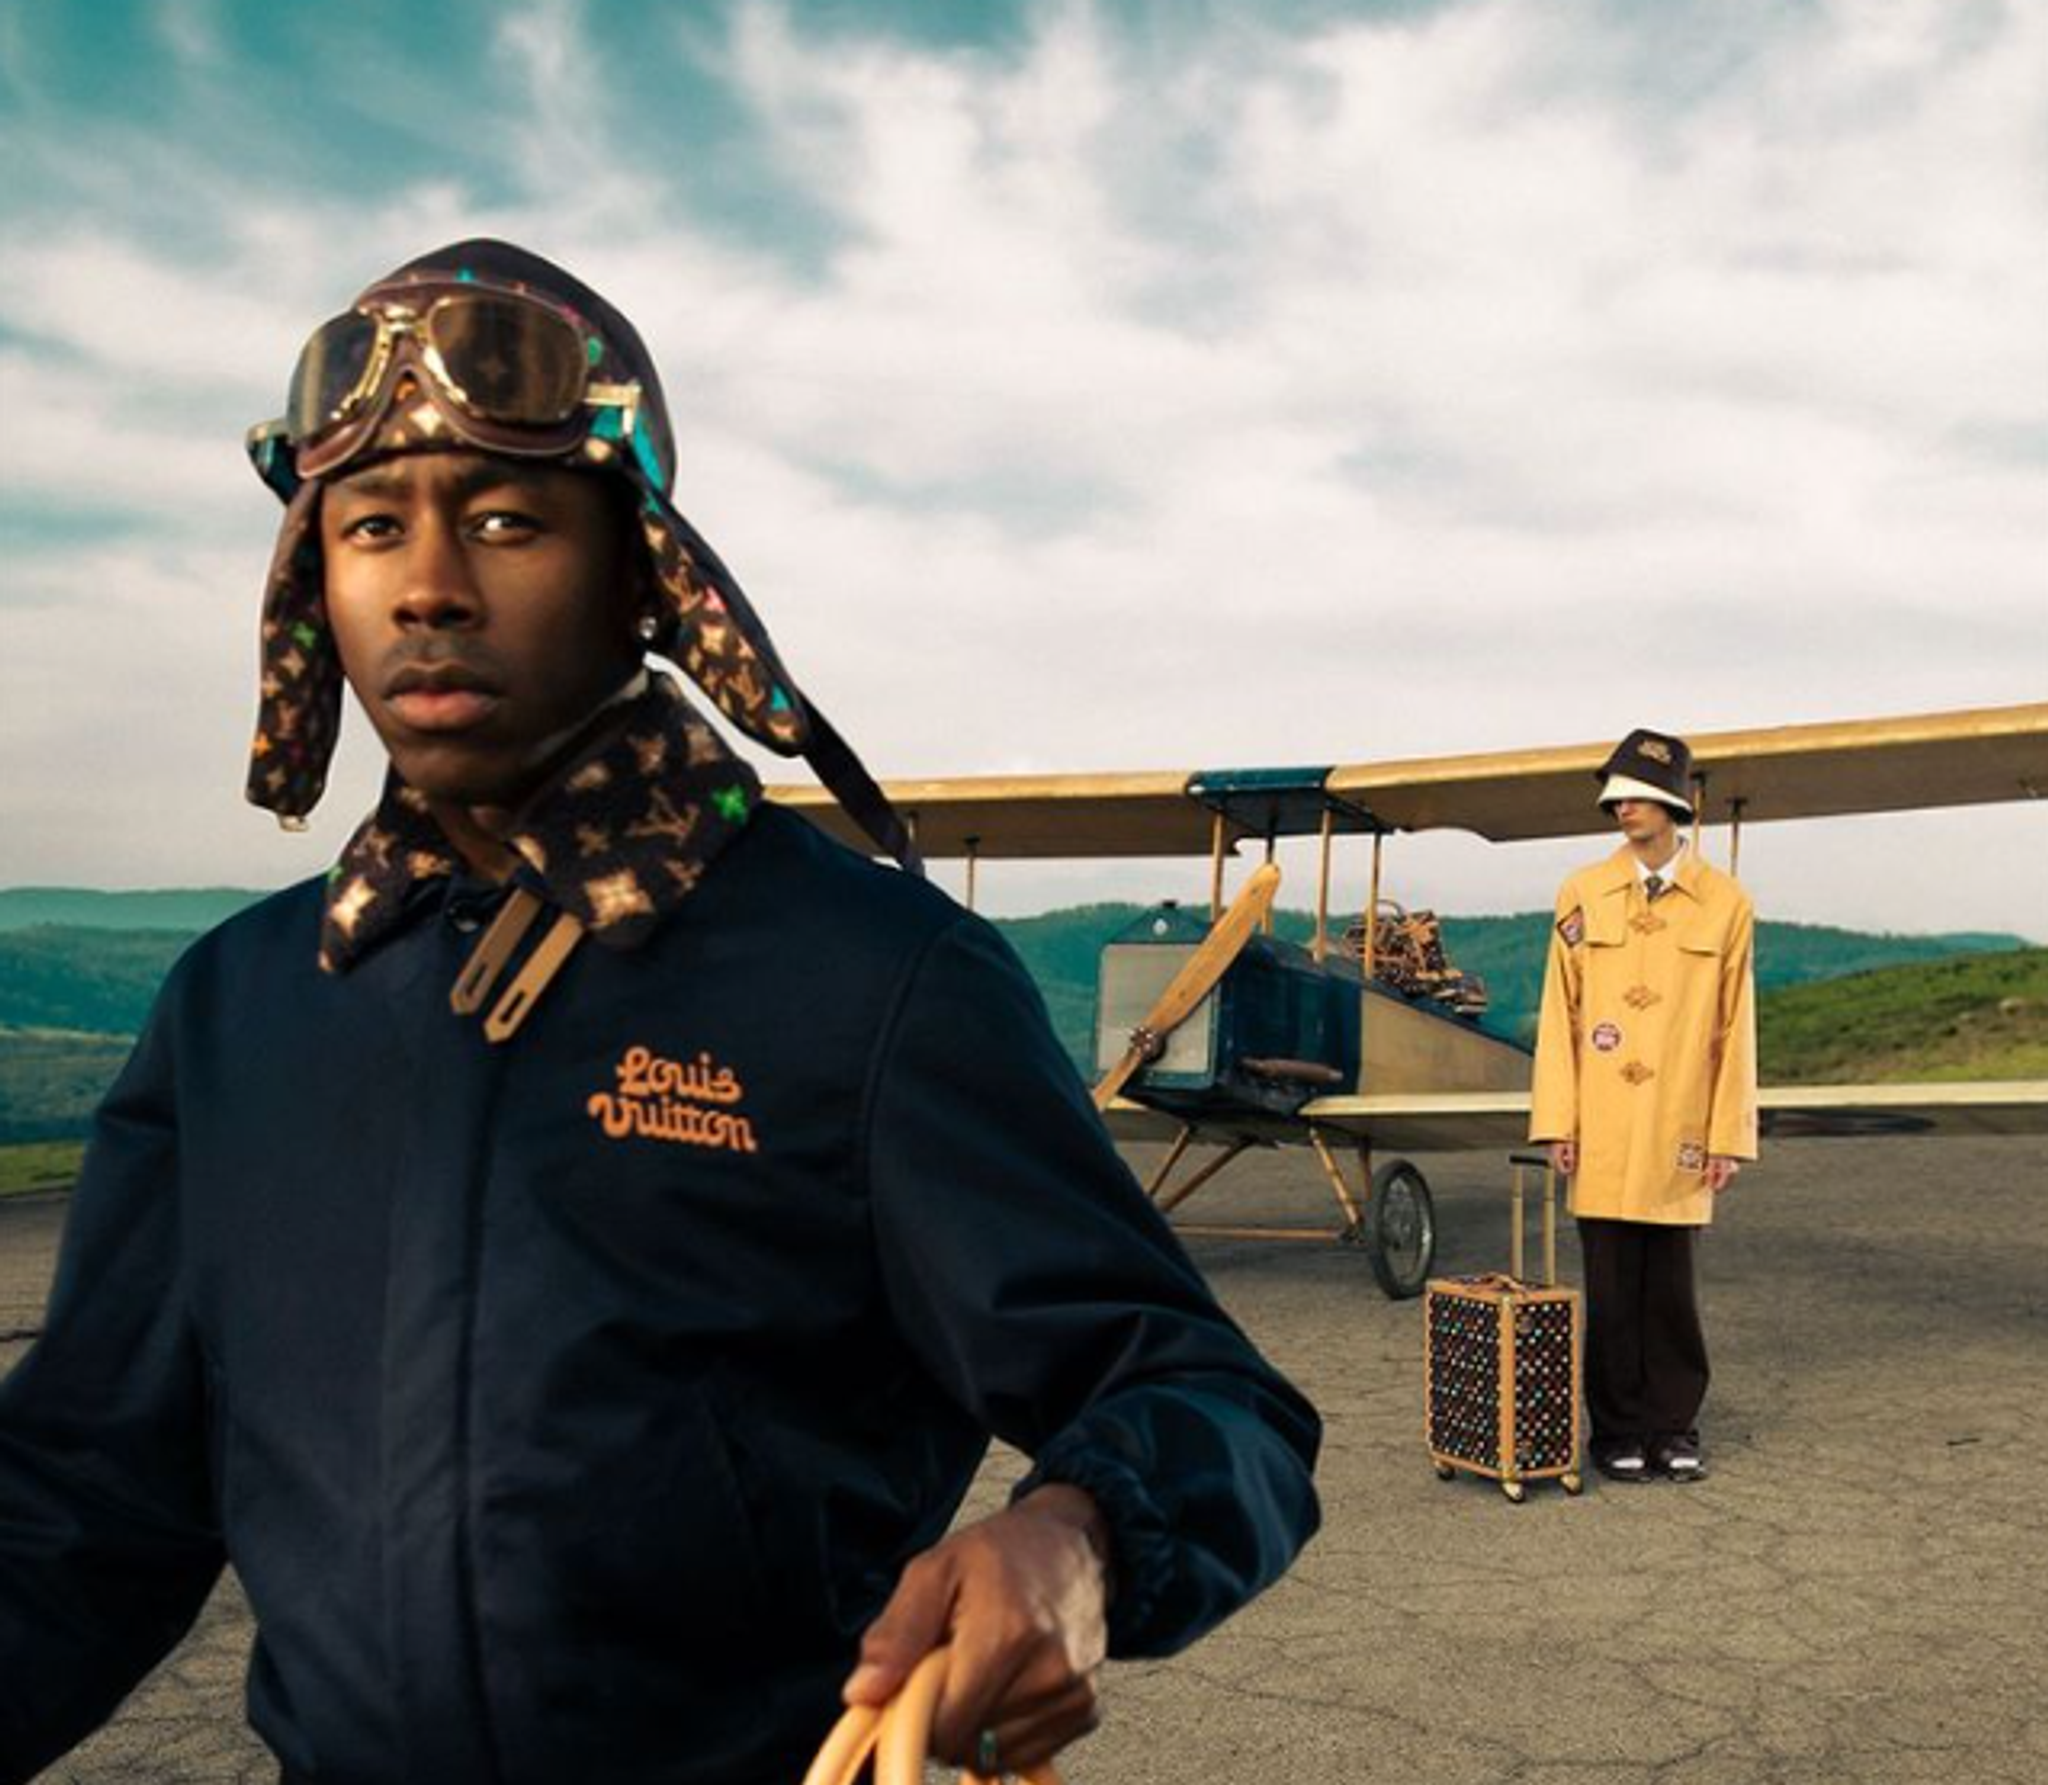 LV capsule taps Tyler, The Creator to amp up star power